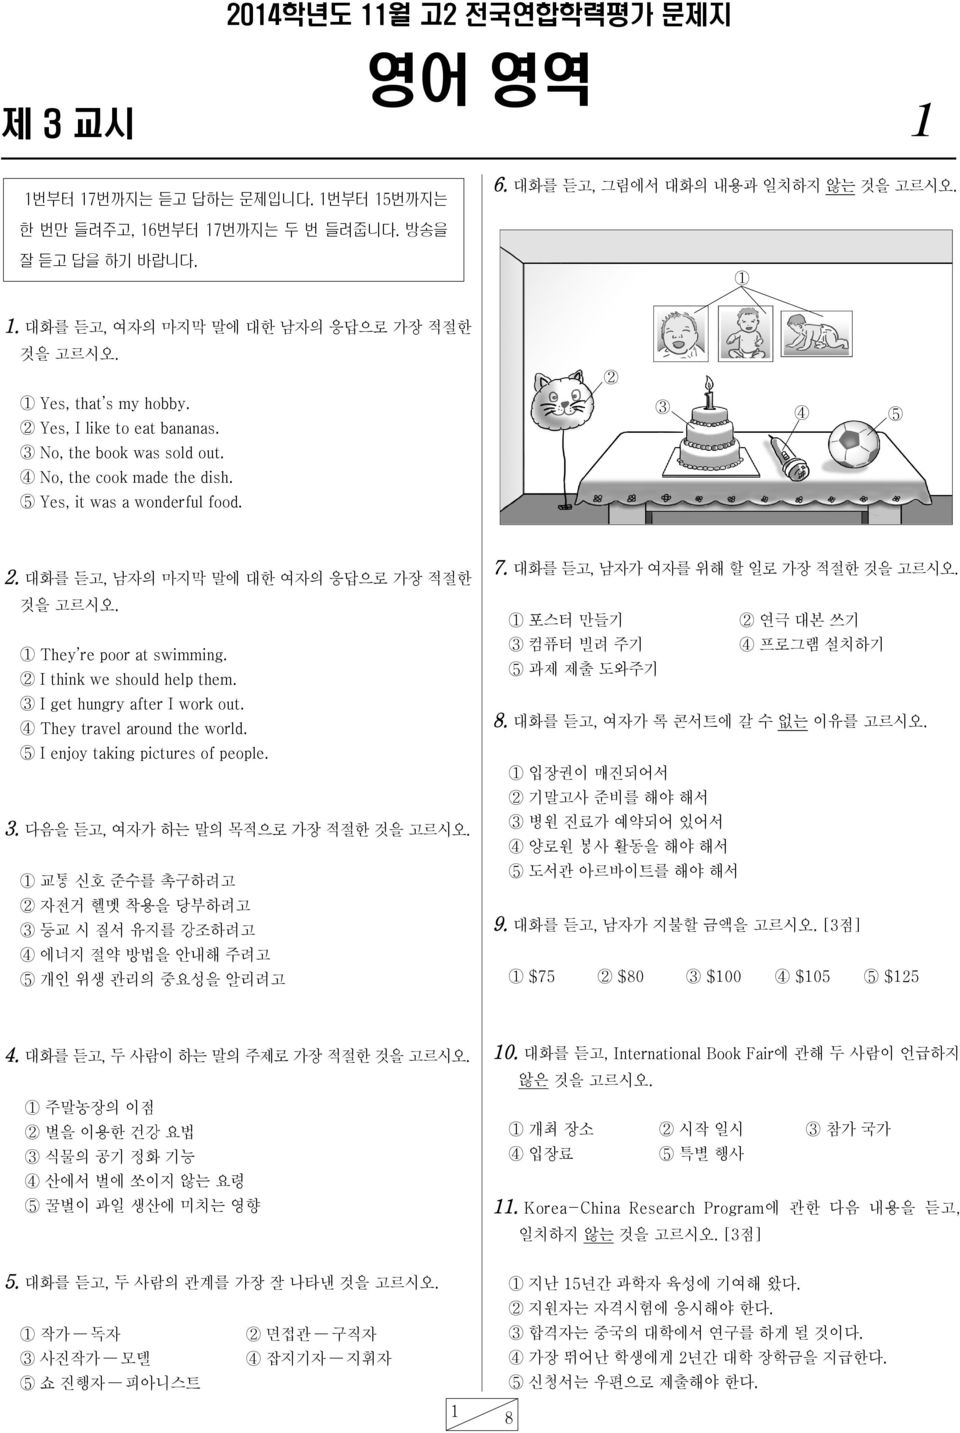 1 They re poor at swimming. 2 I think we should help them. 3 I get hungry after I work out. 4 They travel around the world. 5 I enjoy taking pictures of people. 3. 다음을 듣고, 여자가 하는 말의 목적으로 가장 적절한 것을 고르시오.